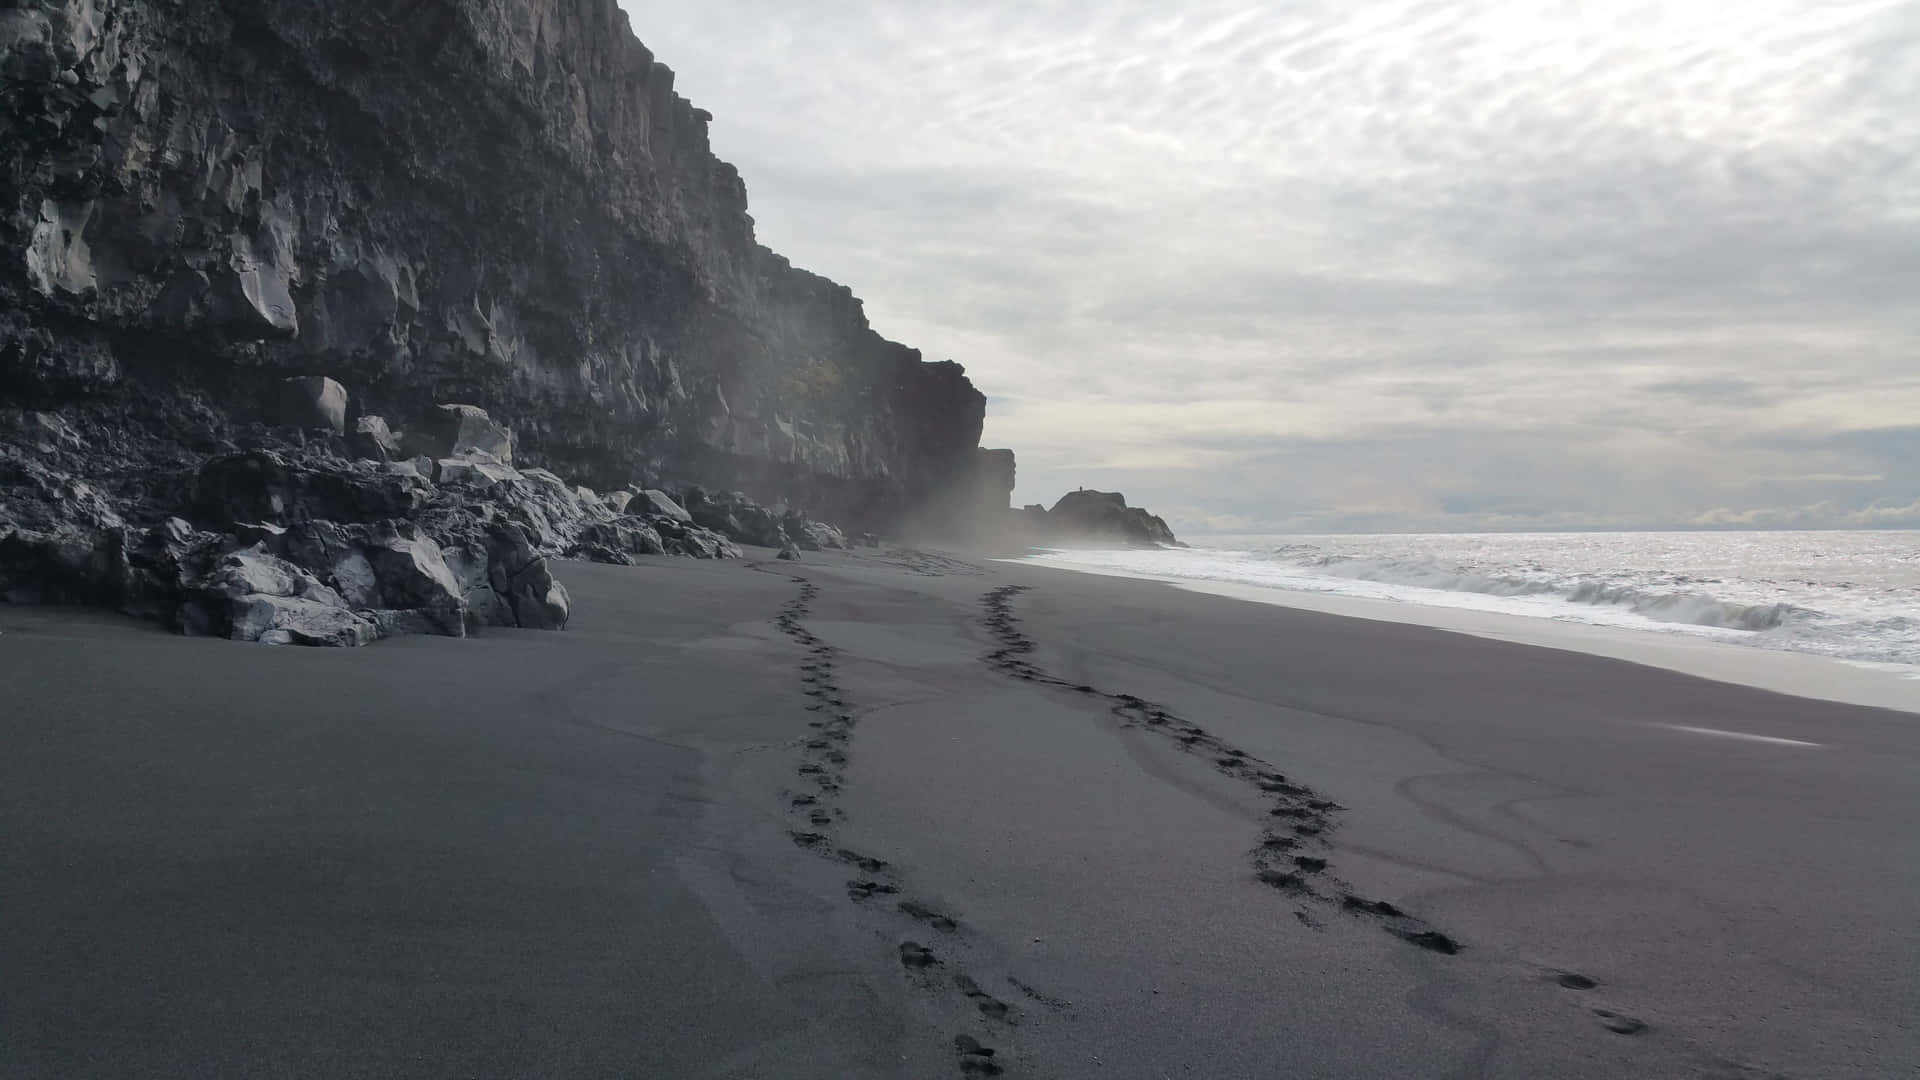 An eye-catching view of a black sand beach on a sunny day. Wallpaper